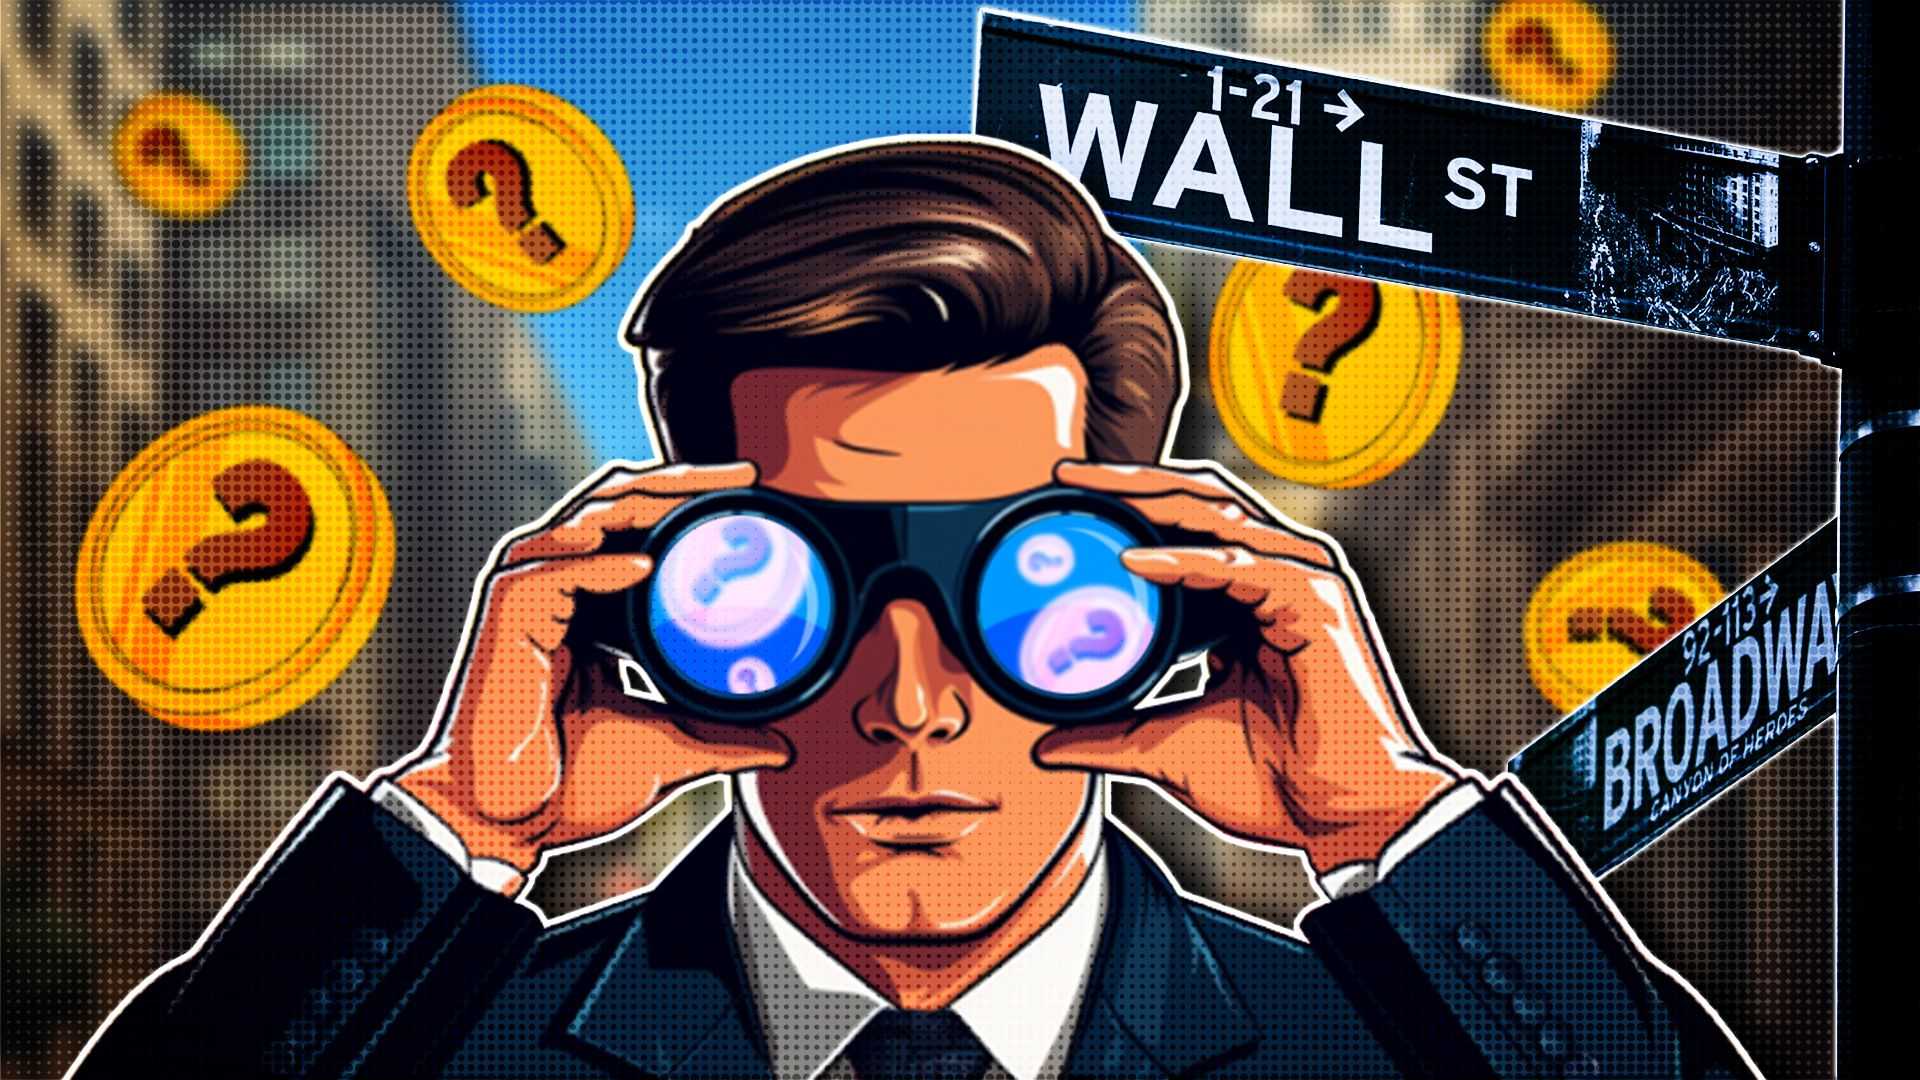 Crypto Institutional Interest: What Coins Are Wall Street Looking At?